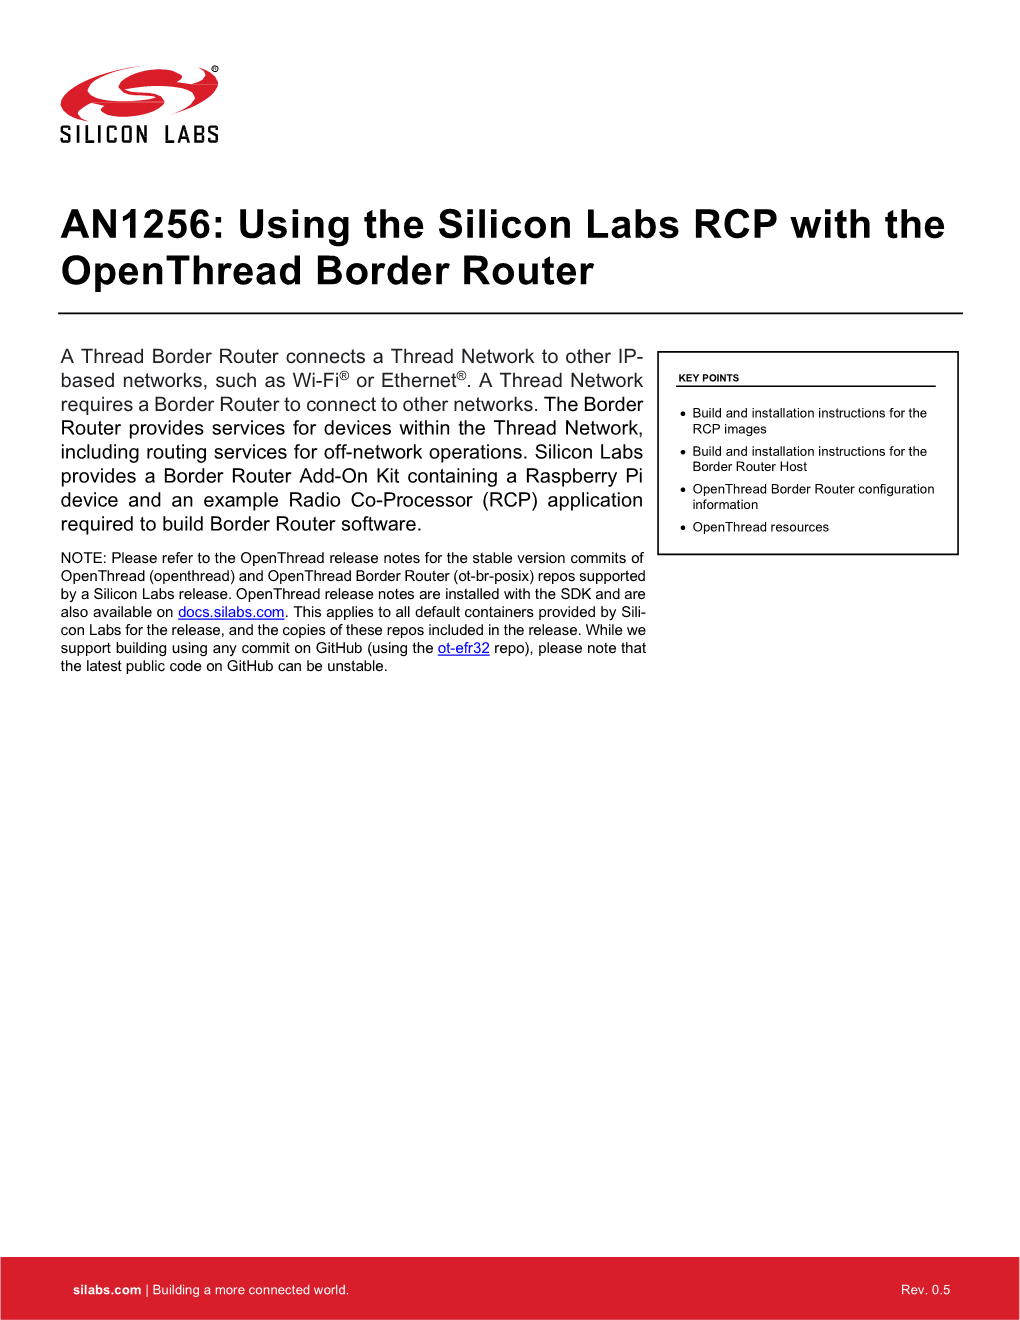 AN1256: Using the Silicon Labs RCP with the Openthread Border Router